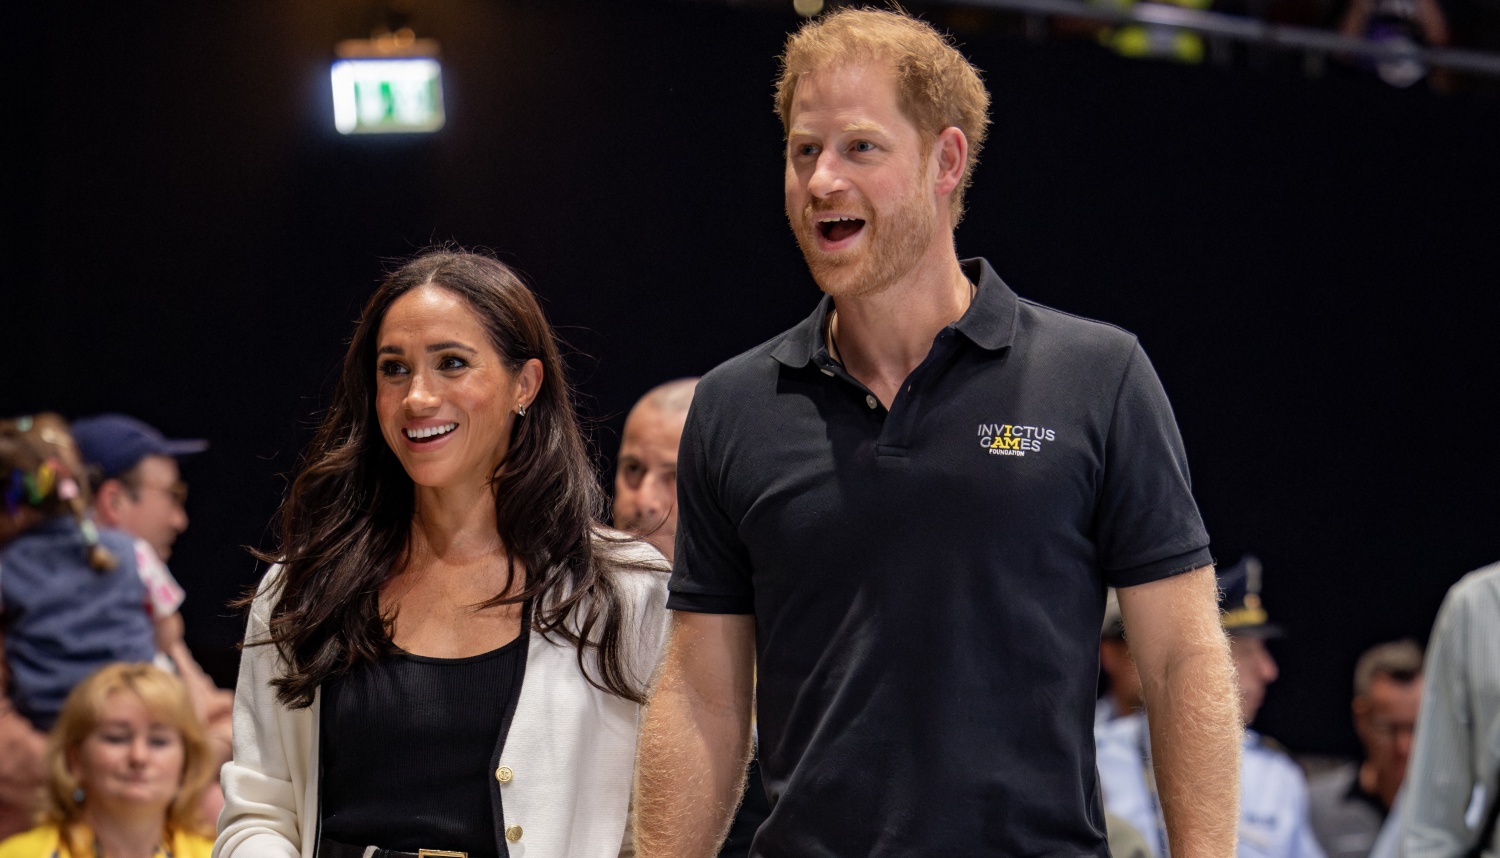 Meghan Markle, Duchess of Sussex (L) and Britain's Prince Harry, Duke of Sussex